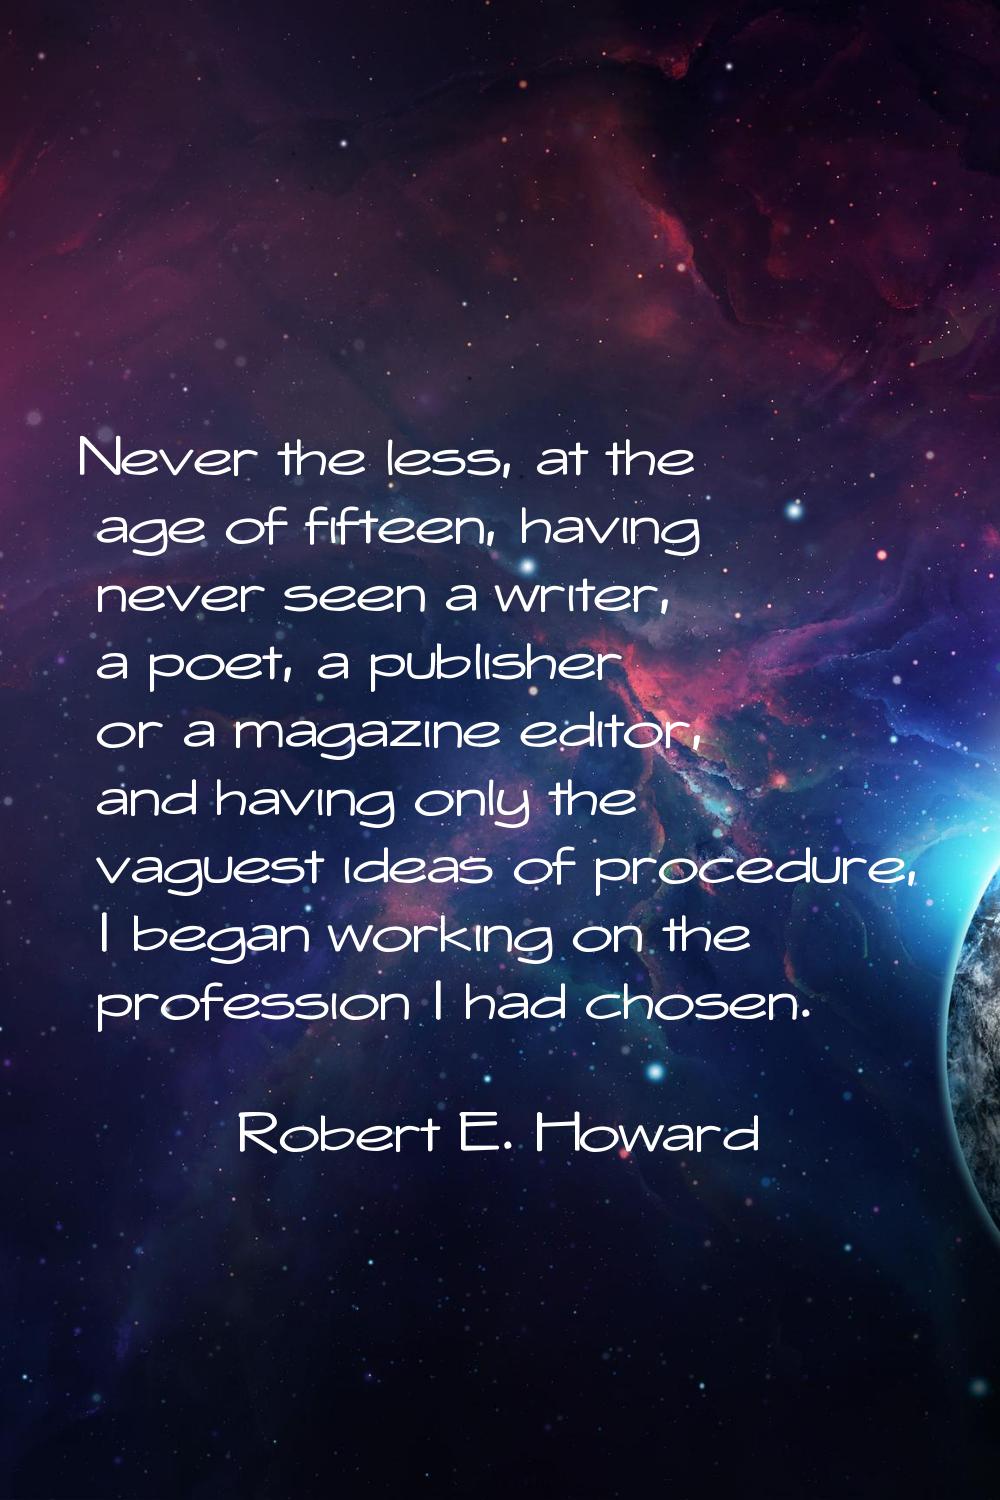 Never the less, at the age of fifteen, having never seen a writer, a poet, a publisher or a magazin